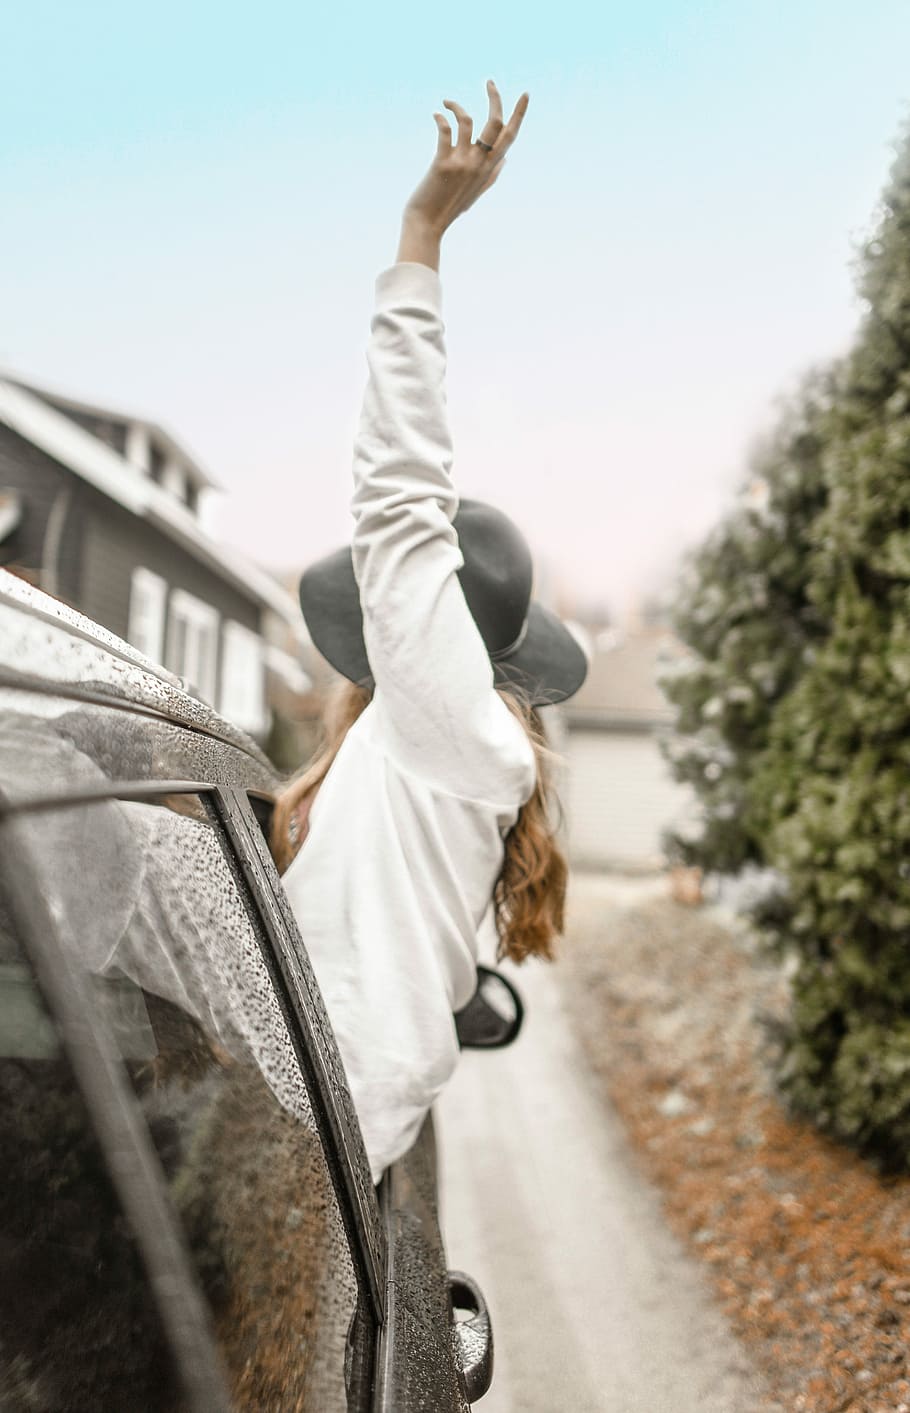 woman rising left hand on vehicle window during daytime, woman leaning outside of car through window raising her hand